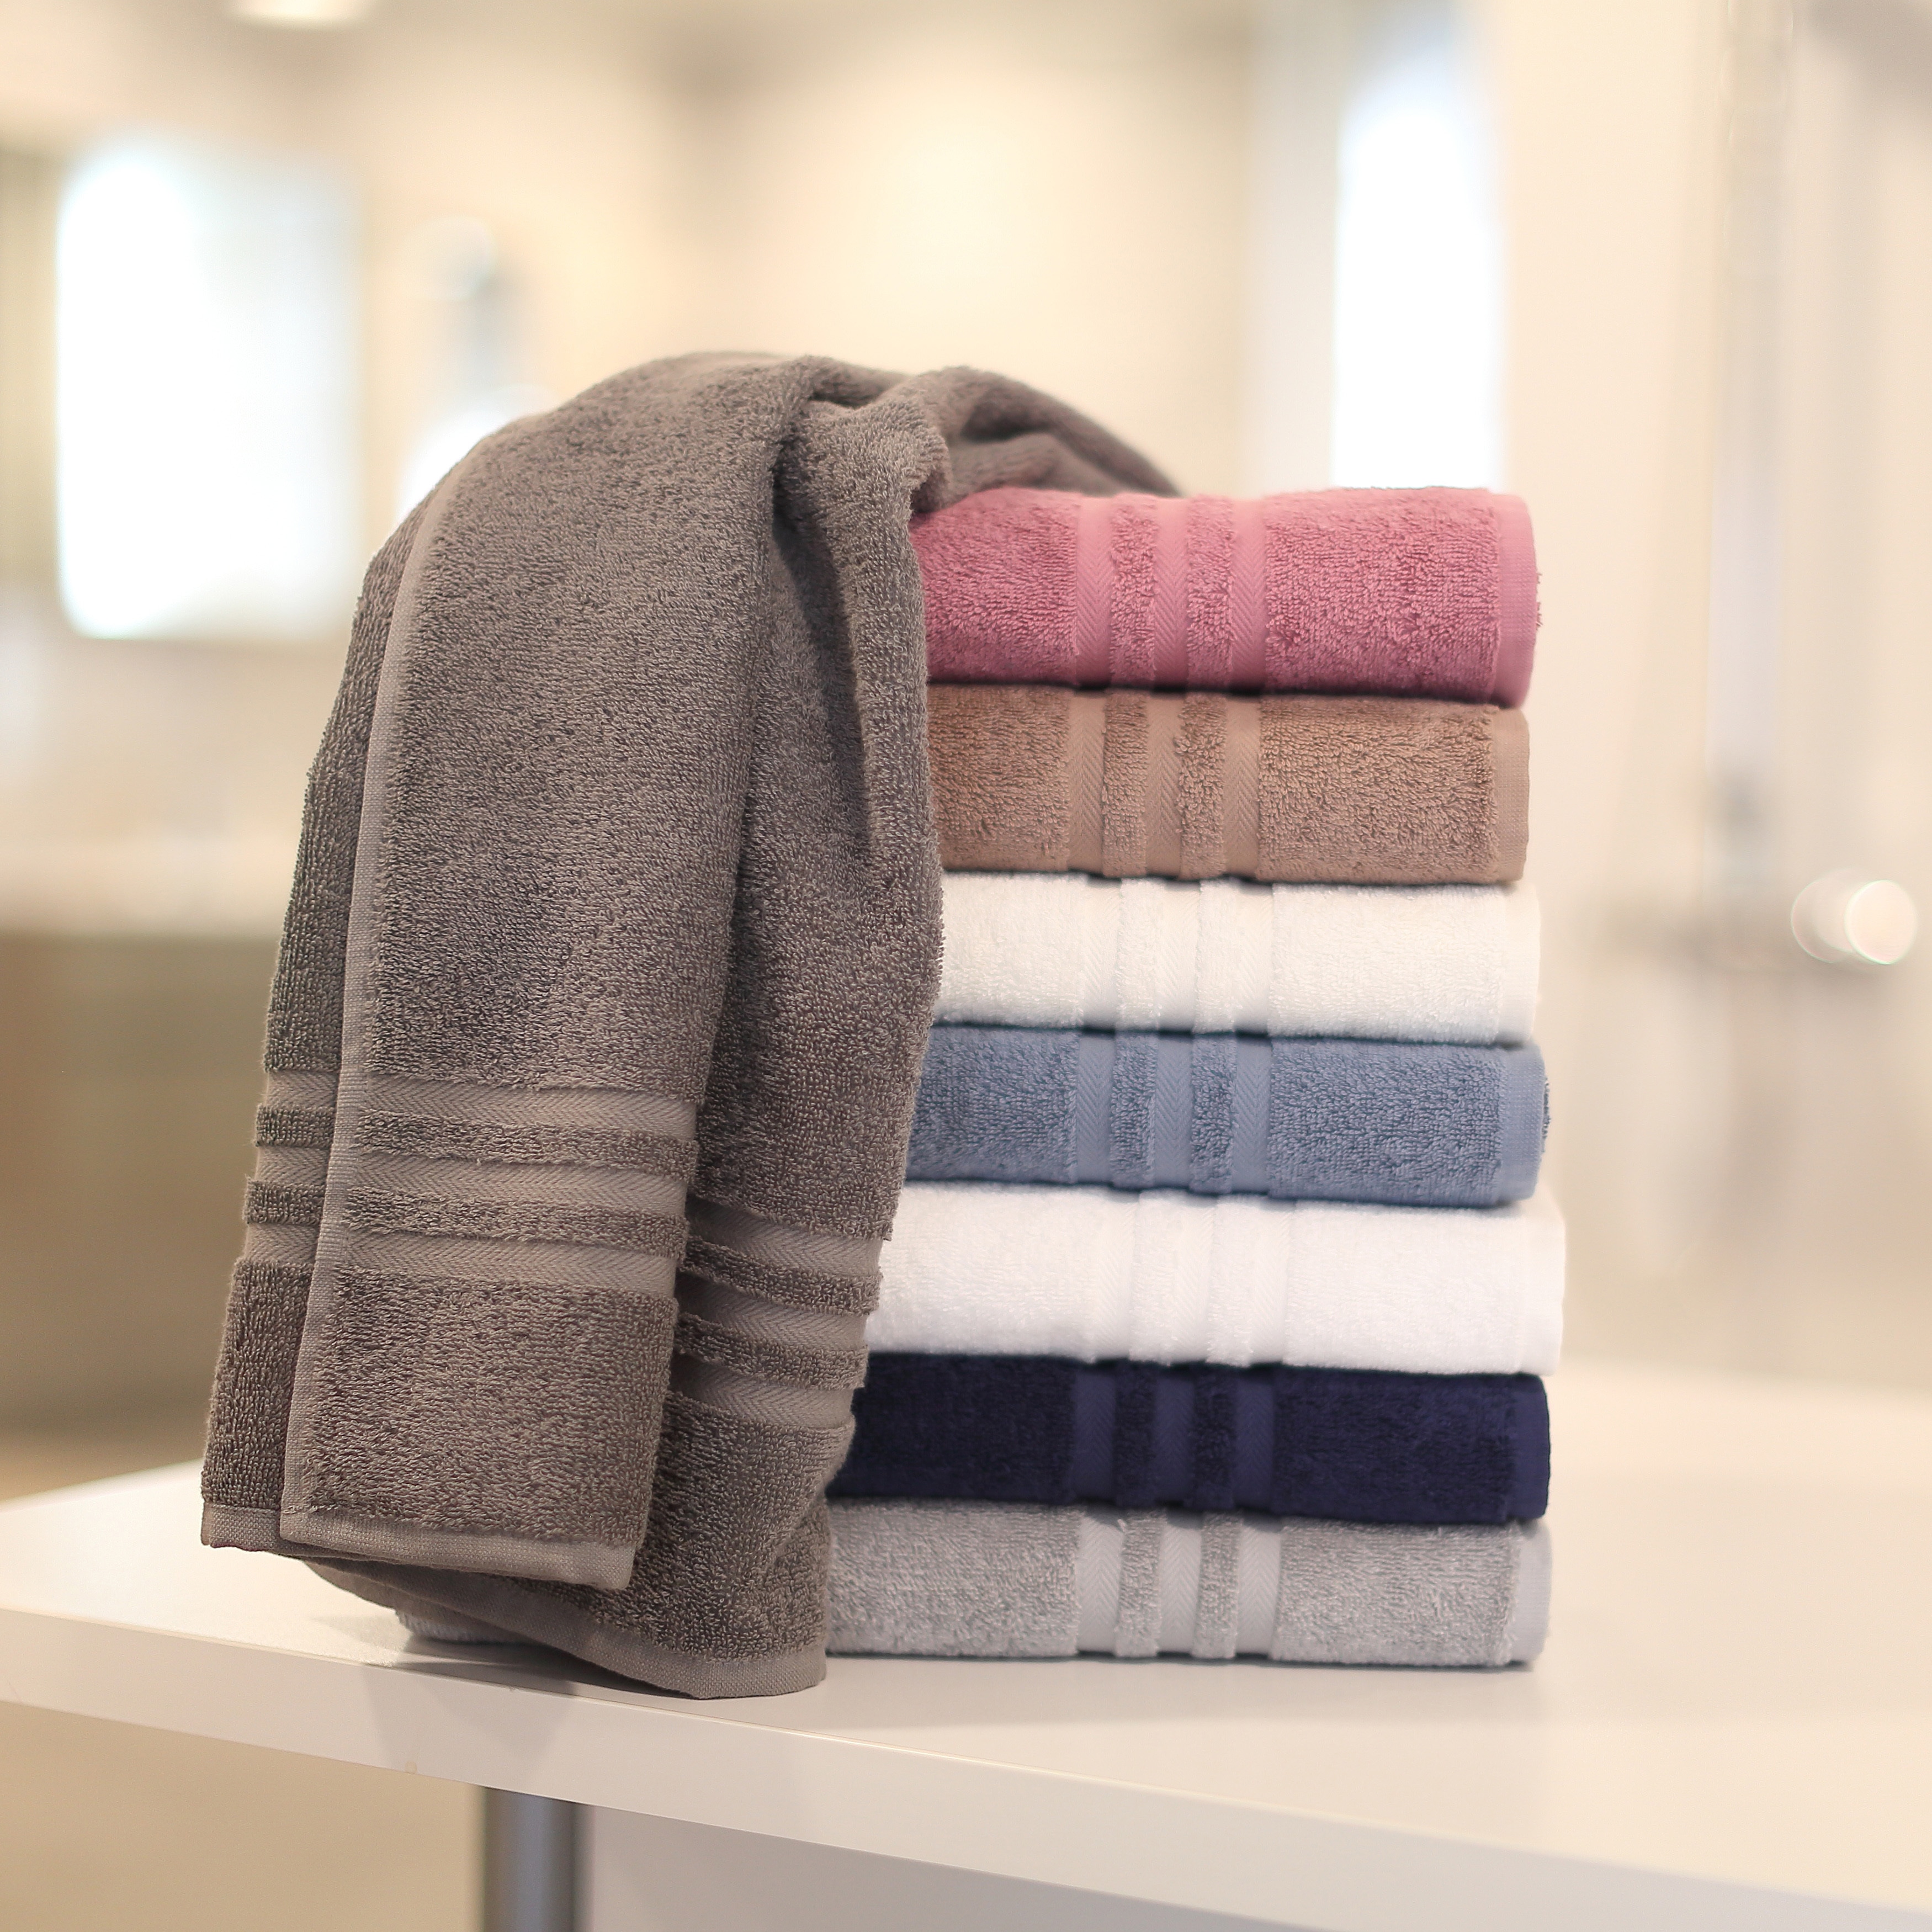 https://ak1.ostkcdn.com/images/products/11090782/Authentic-Hotel-and-Spa-Omni-Turkish-Cotton-Terry-Hand-Towels-Set-of-4-ddd812db-4a99-4911-818f-f2588f58145b.jpg